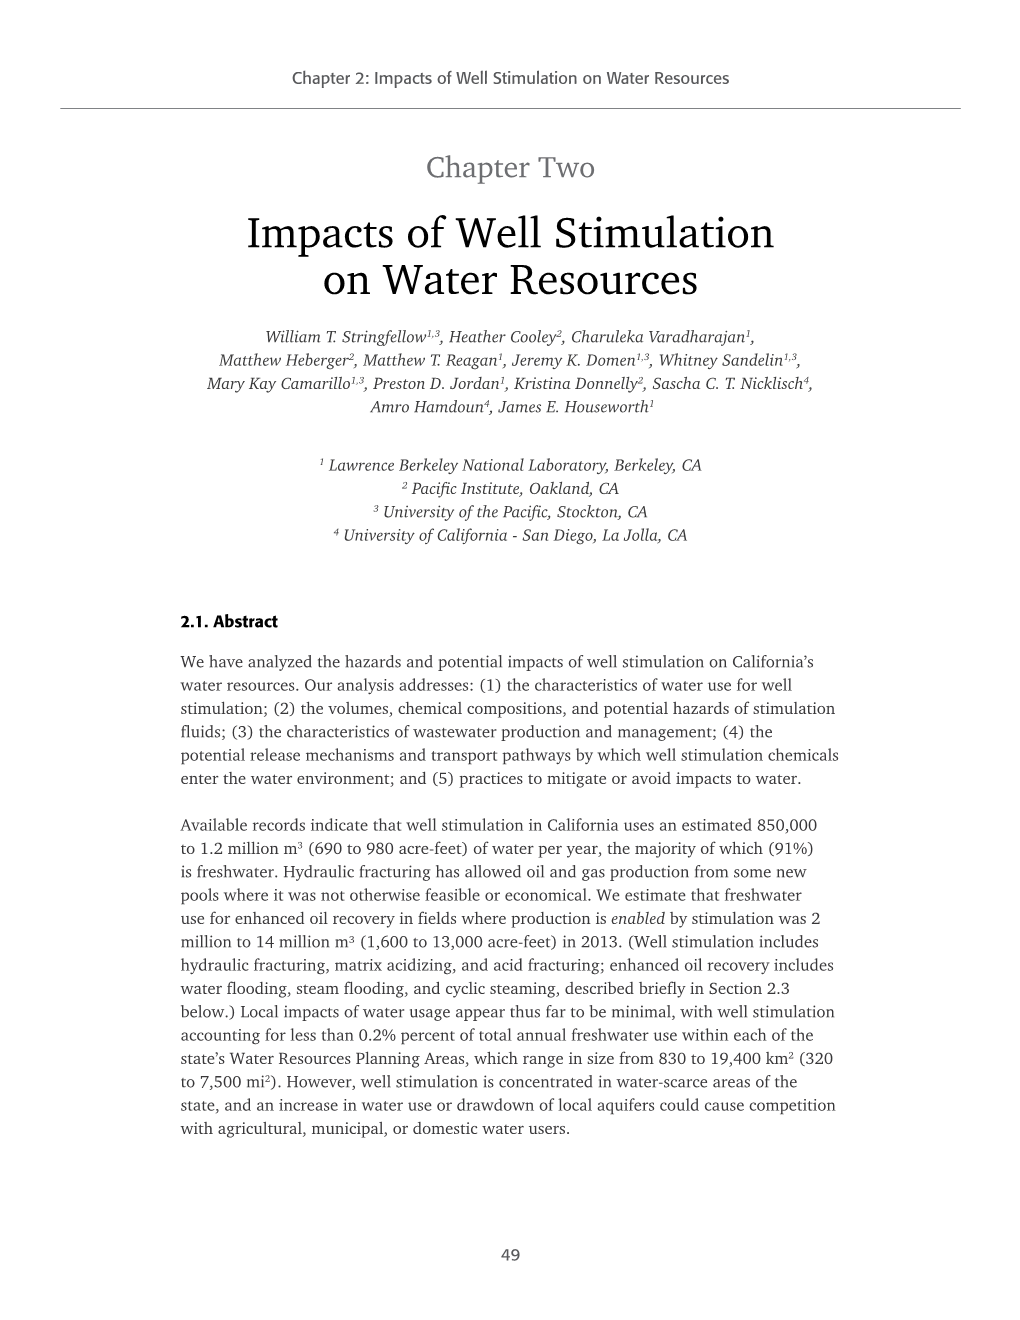 Impacts of Well Stimulation on Water Resources